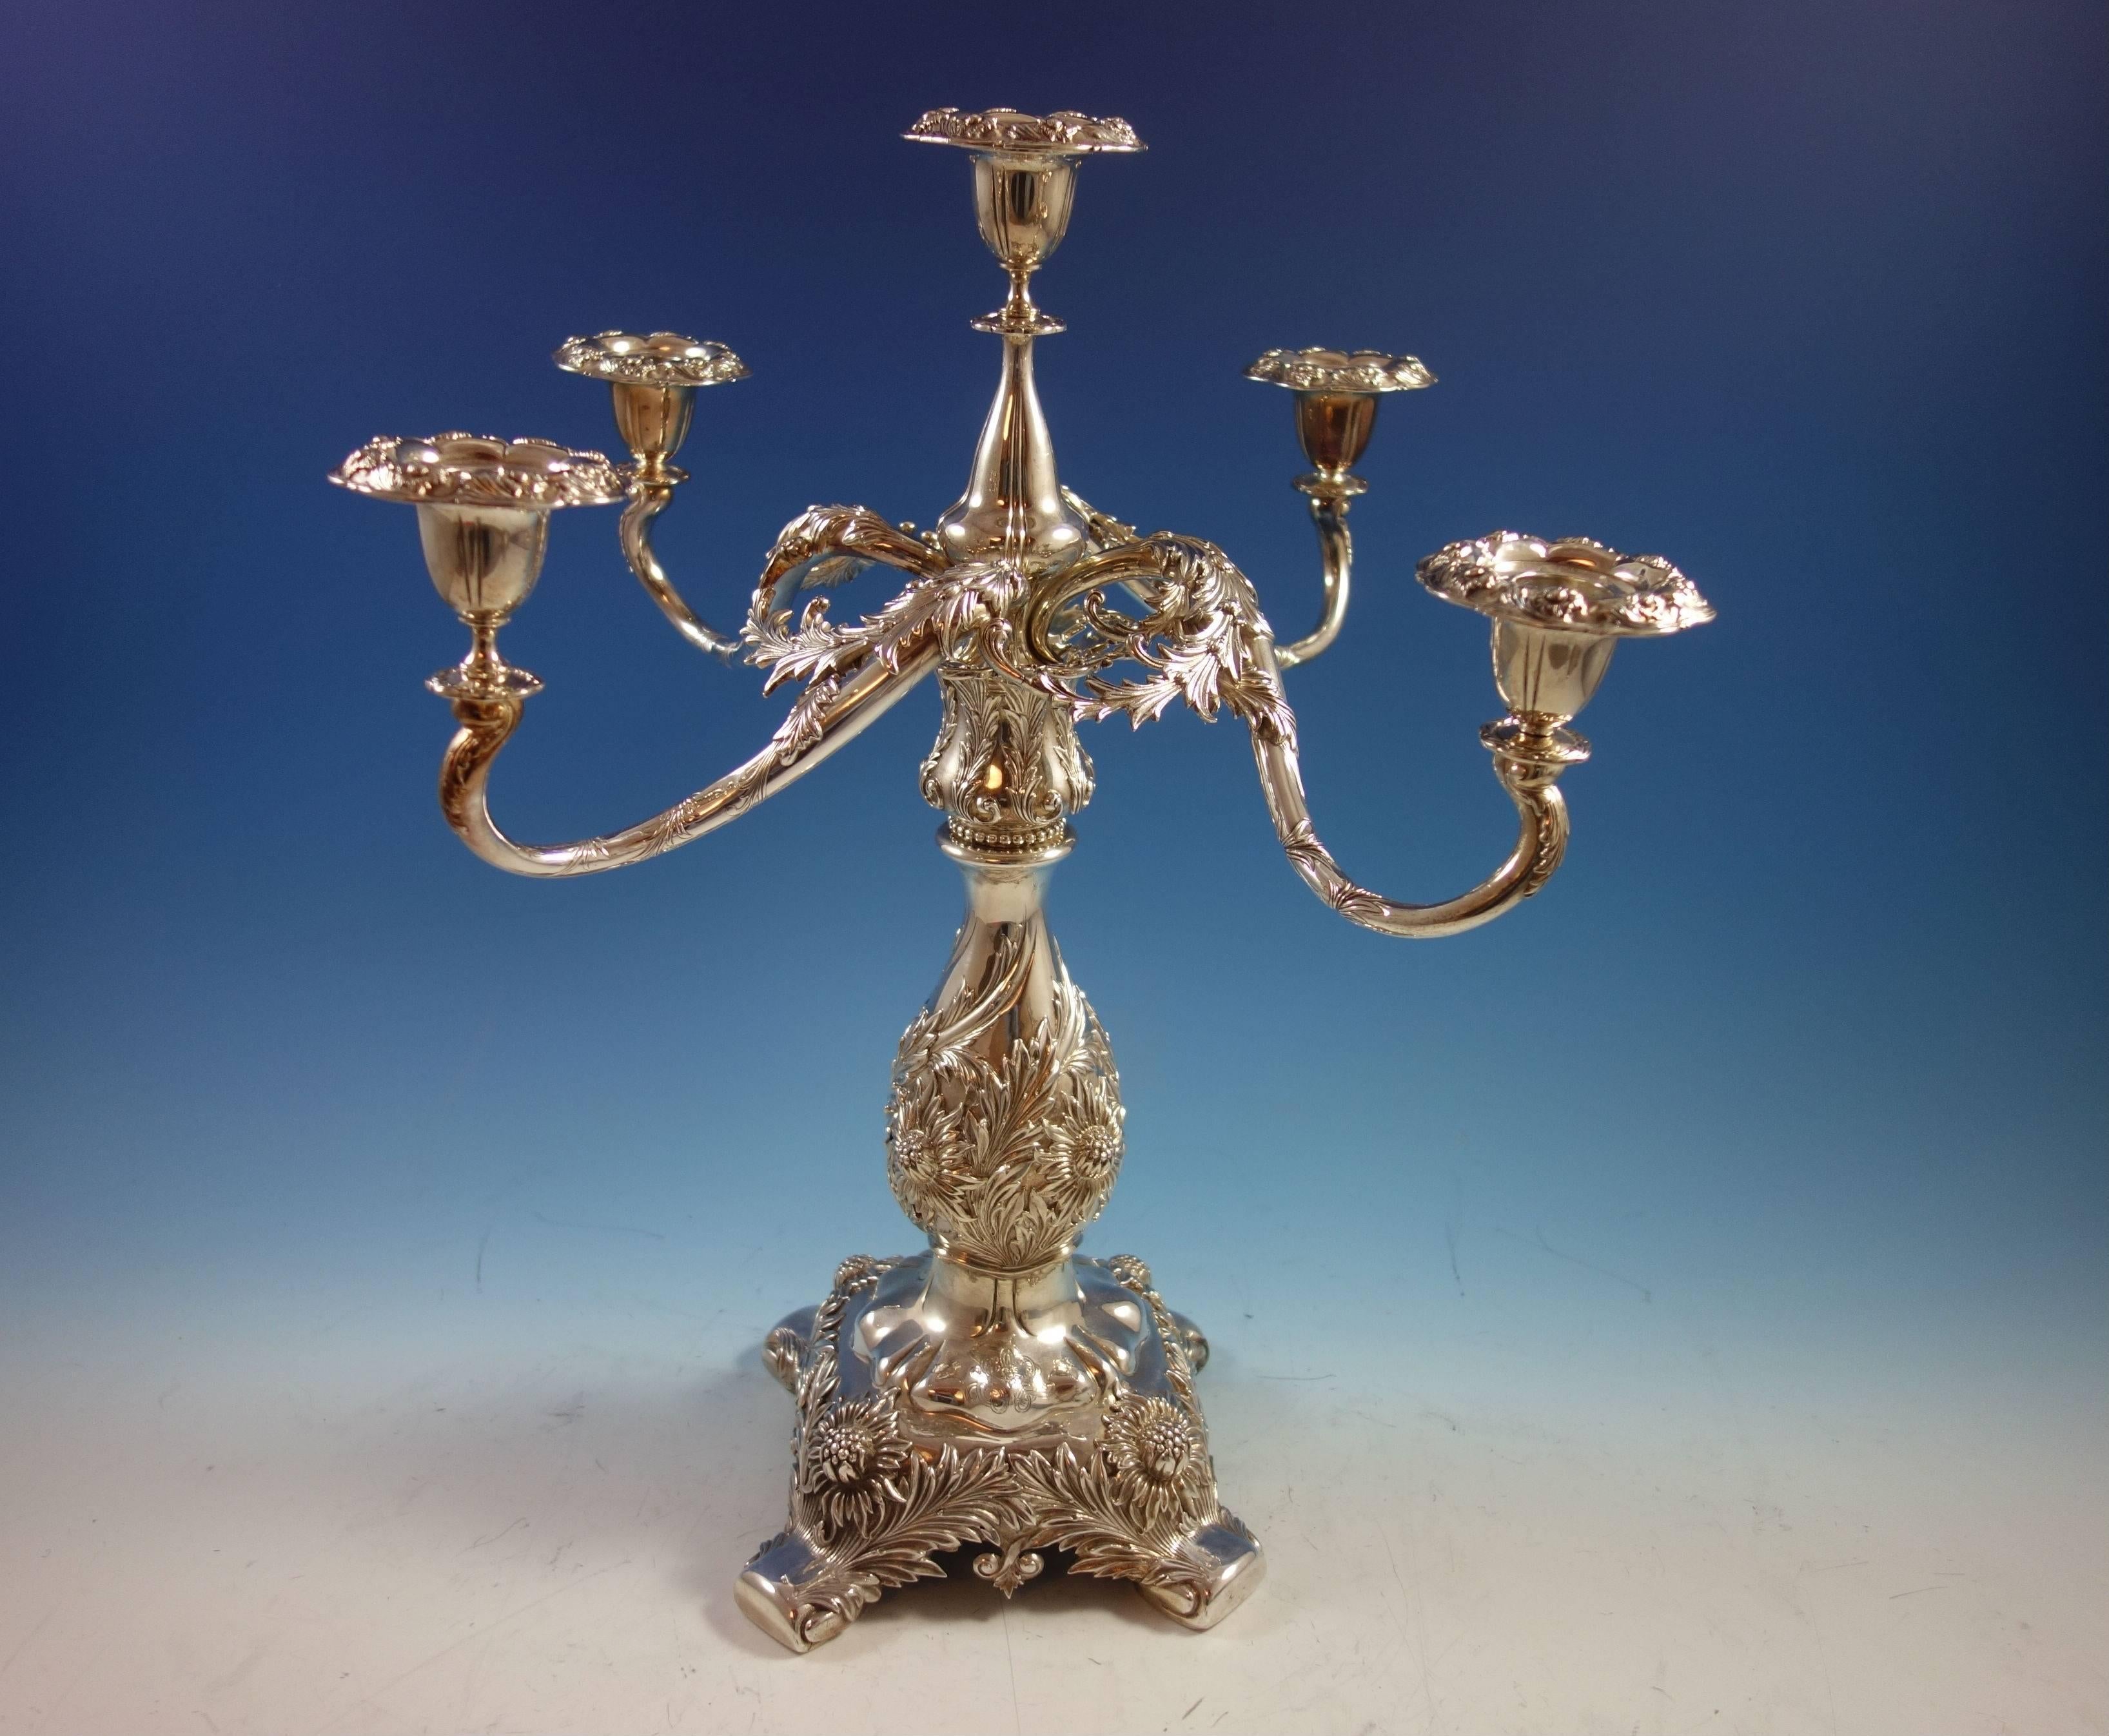 Impressively gorgeous pair of Chrysanthemum by Tiffany & Co. sterling silver candelabras with 5 lights. They are decorated with applied chrysanthemums and leaves. The pieces are marked with #13244/1900 and have a 